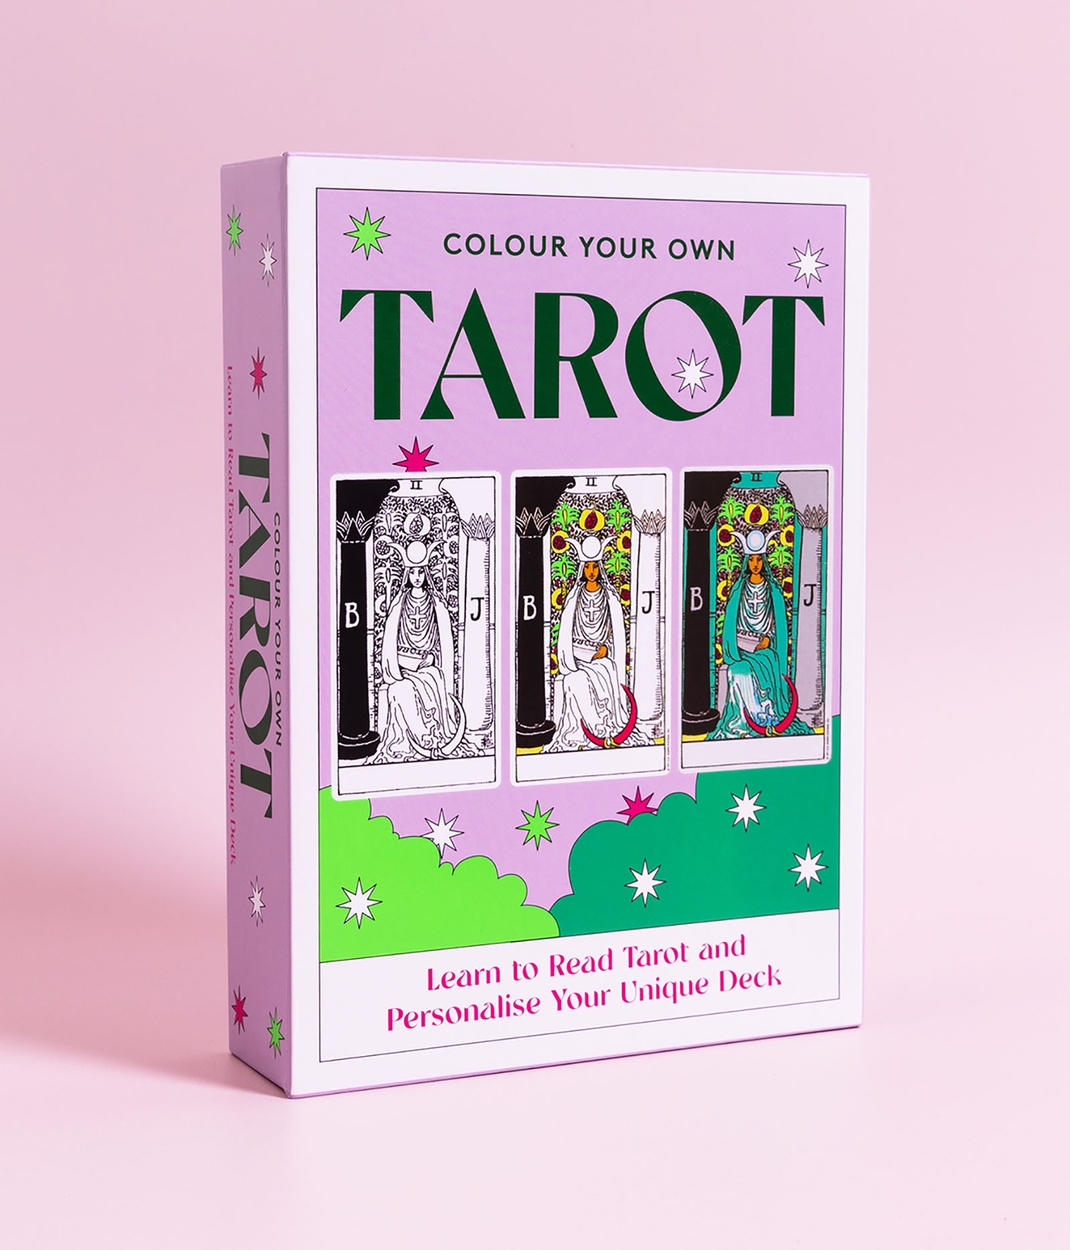 Create Your Own Tarot Cards: A step-by-step guide to designing a unique and personalized tarot deck-Includes 80 cut-out practice cards!: Amazon.co.uk: Hawthorne, Adrianne, Reed, Theresa: 9780760375952